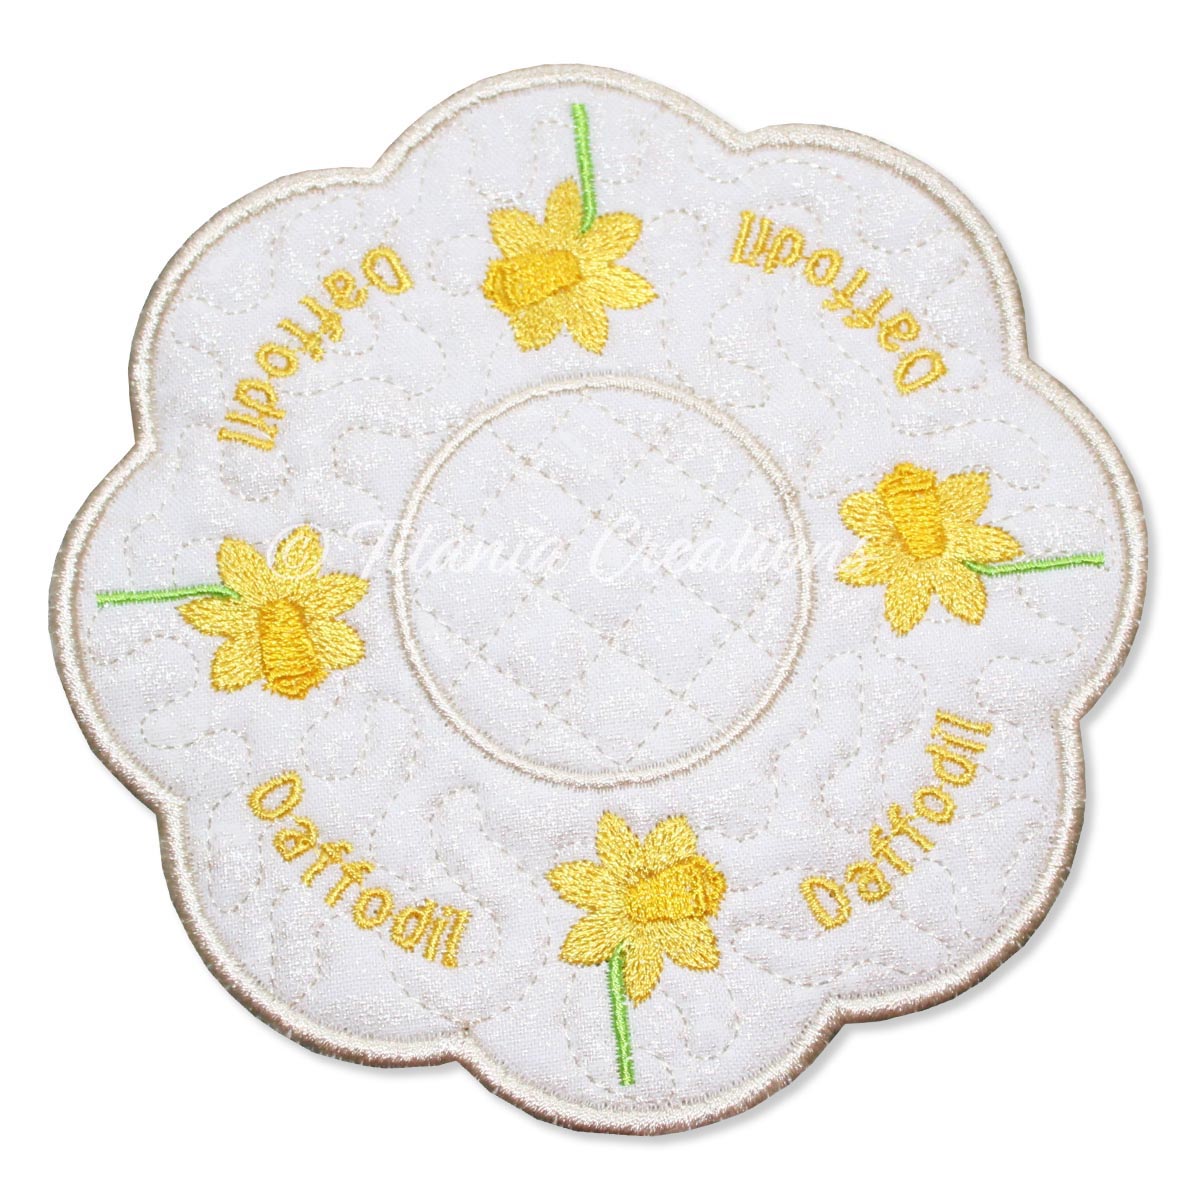 ITH Daffodil March Flower Candle Mat 5x5 6x6 7x7 8x8